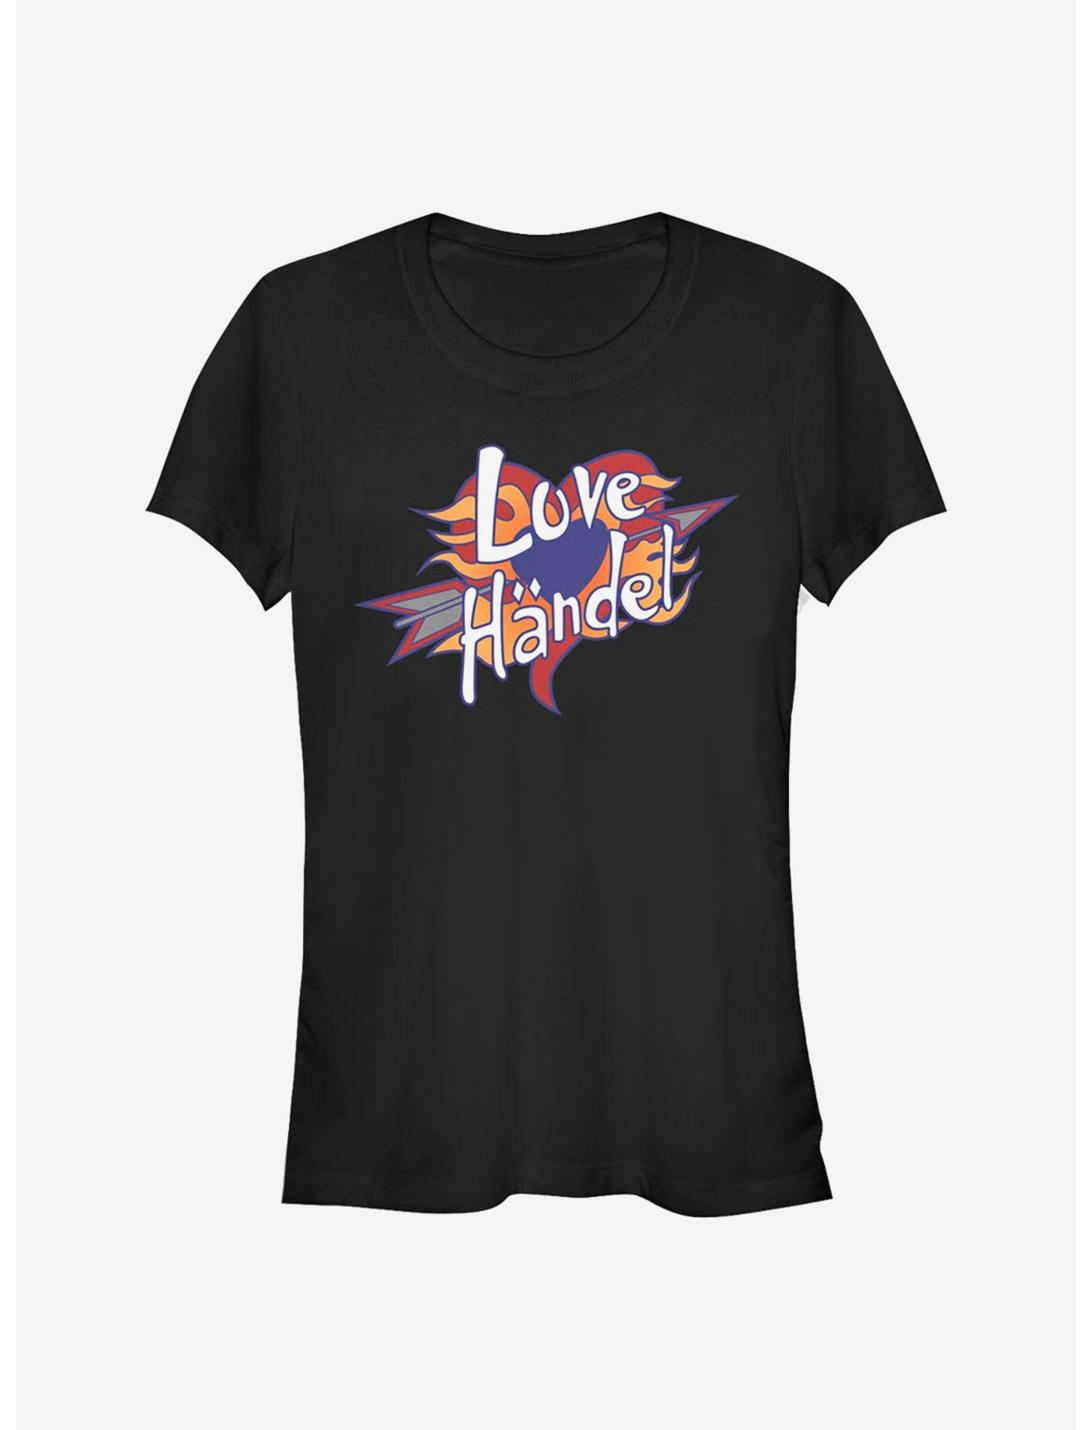 Disney Phineas And Ferb Love Handle Girls T-Shirt, BLACK, hi-res